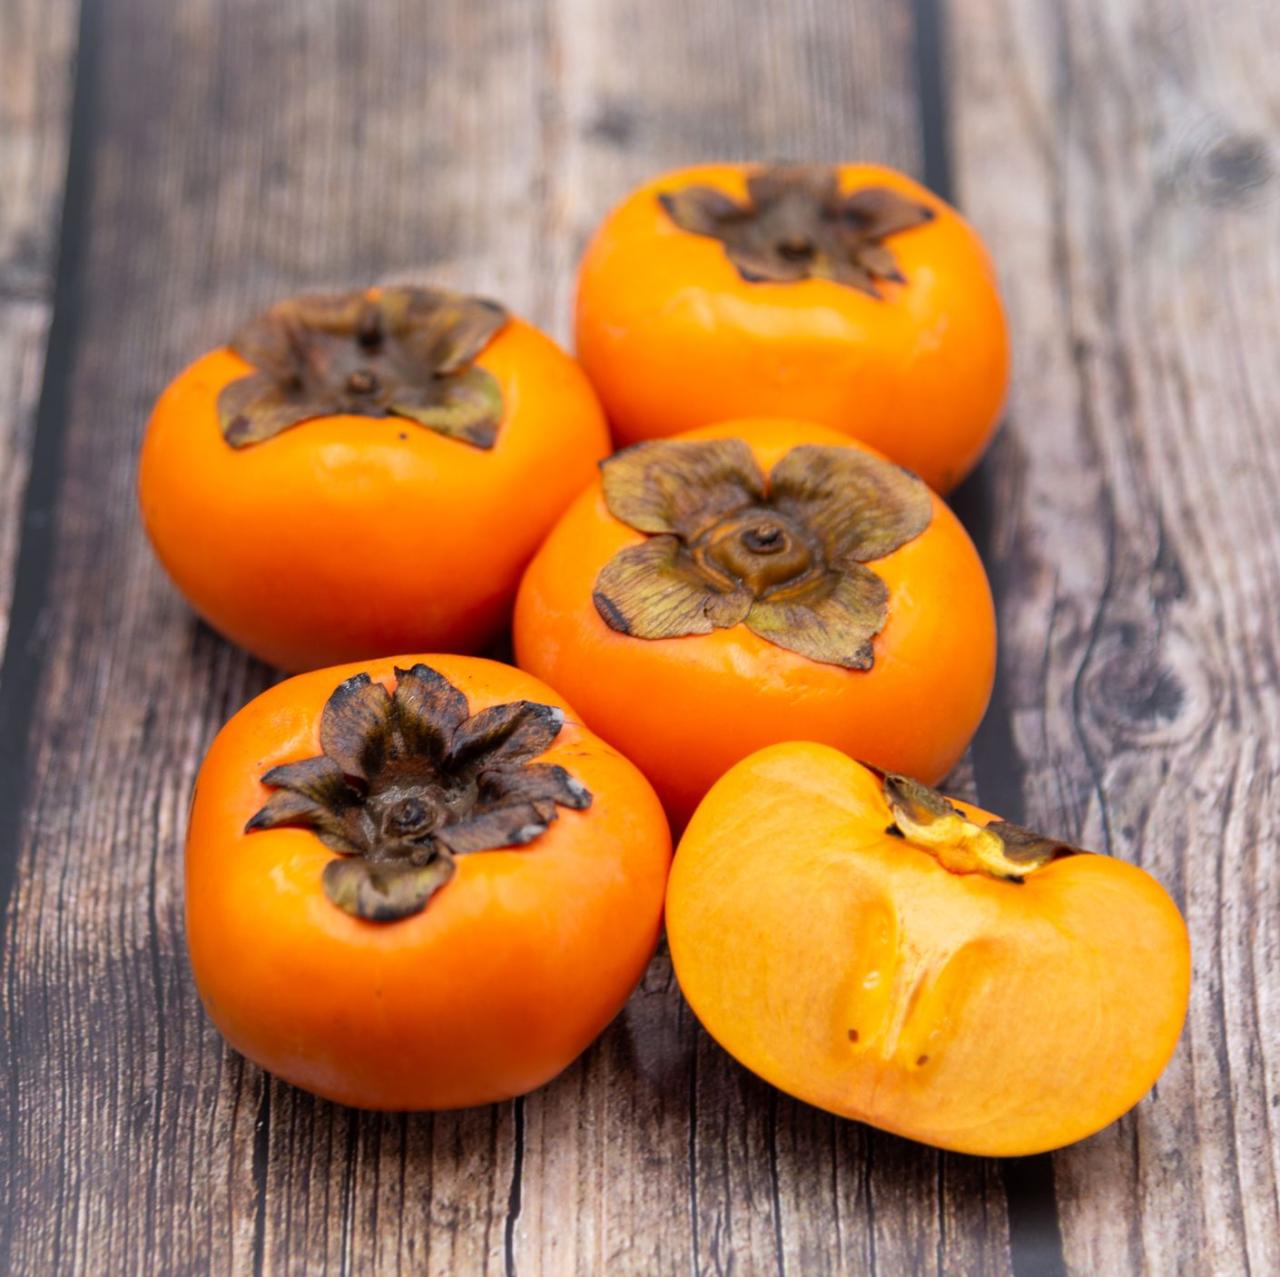 The Many Health Benefits of Persimmons